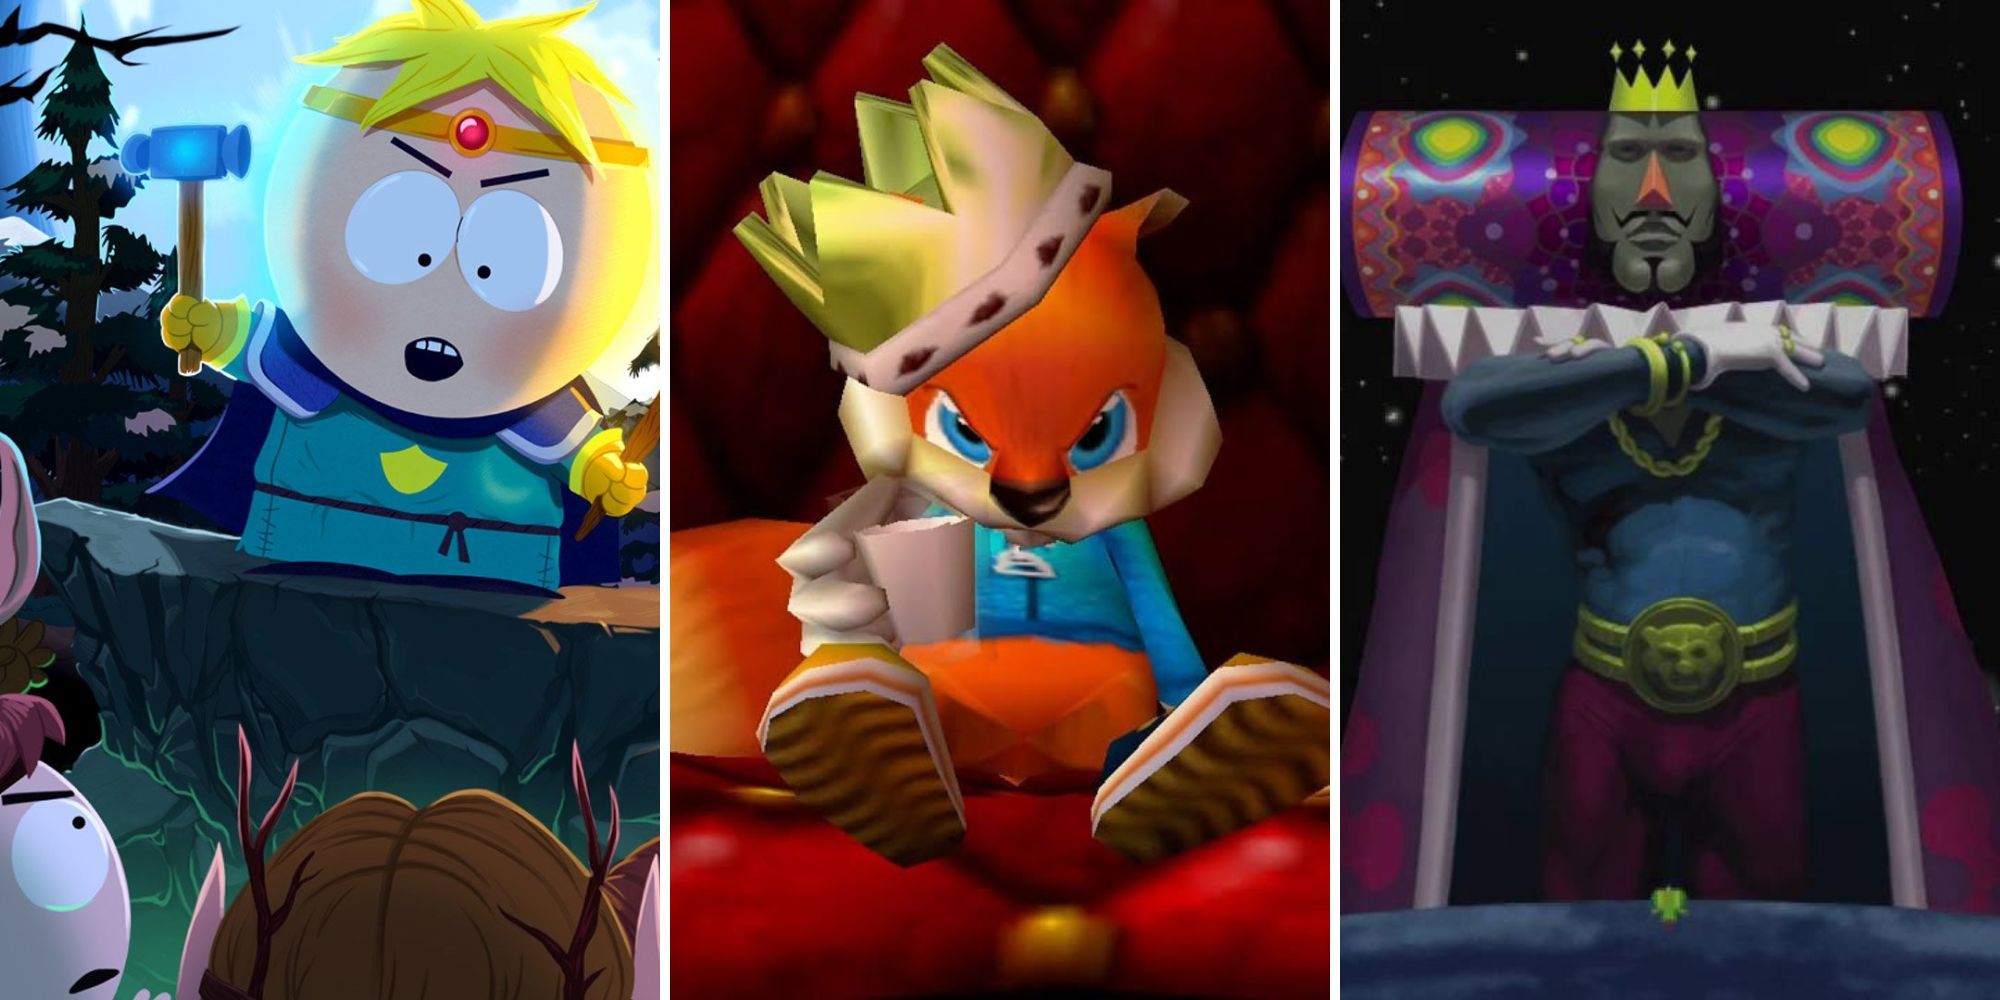 Collage of the funniest video games (South Park: Stick of Truth, Conker's Bad Fur Day, Katamari Damacy)